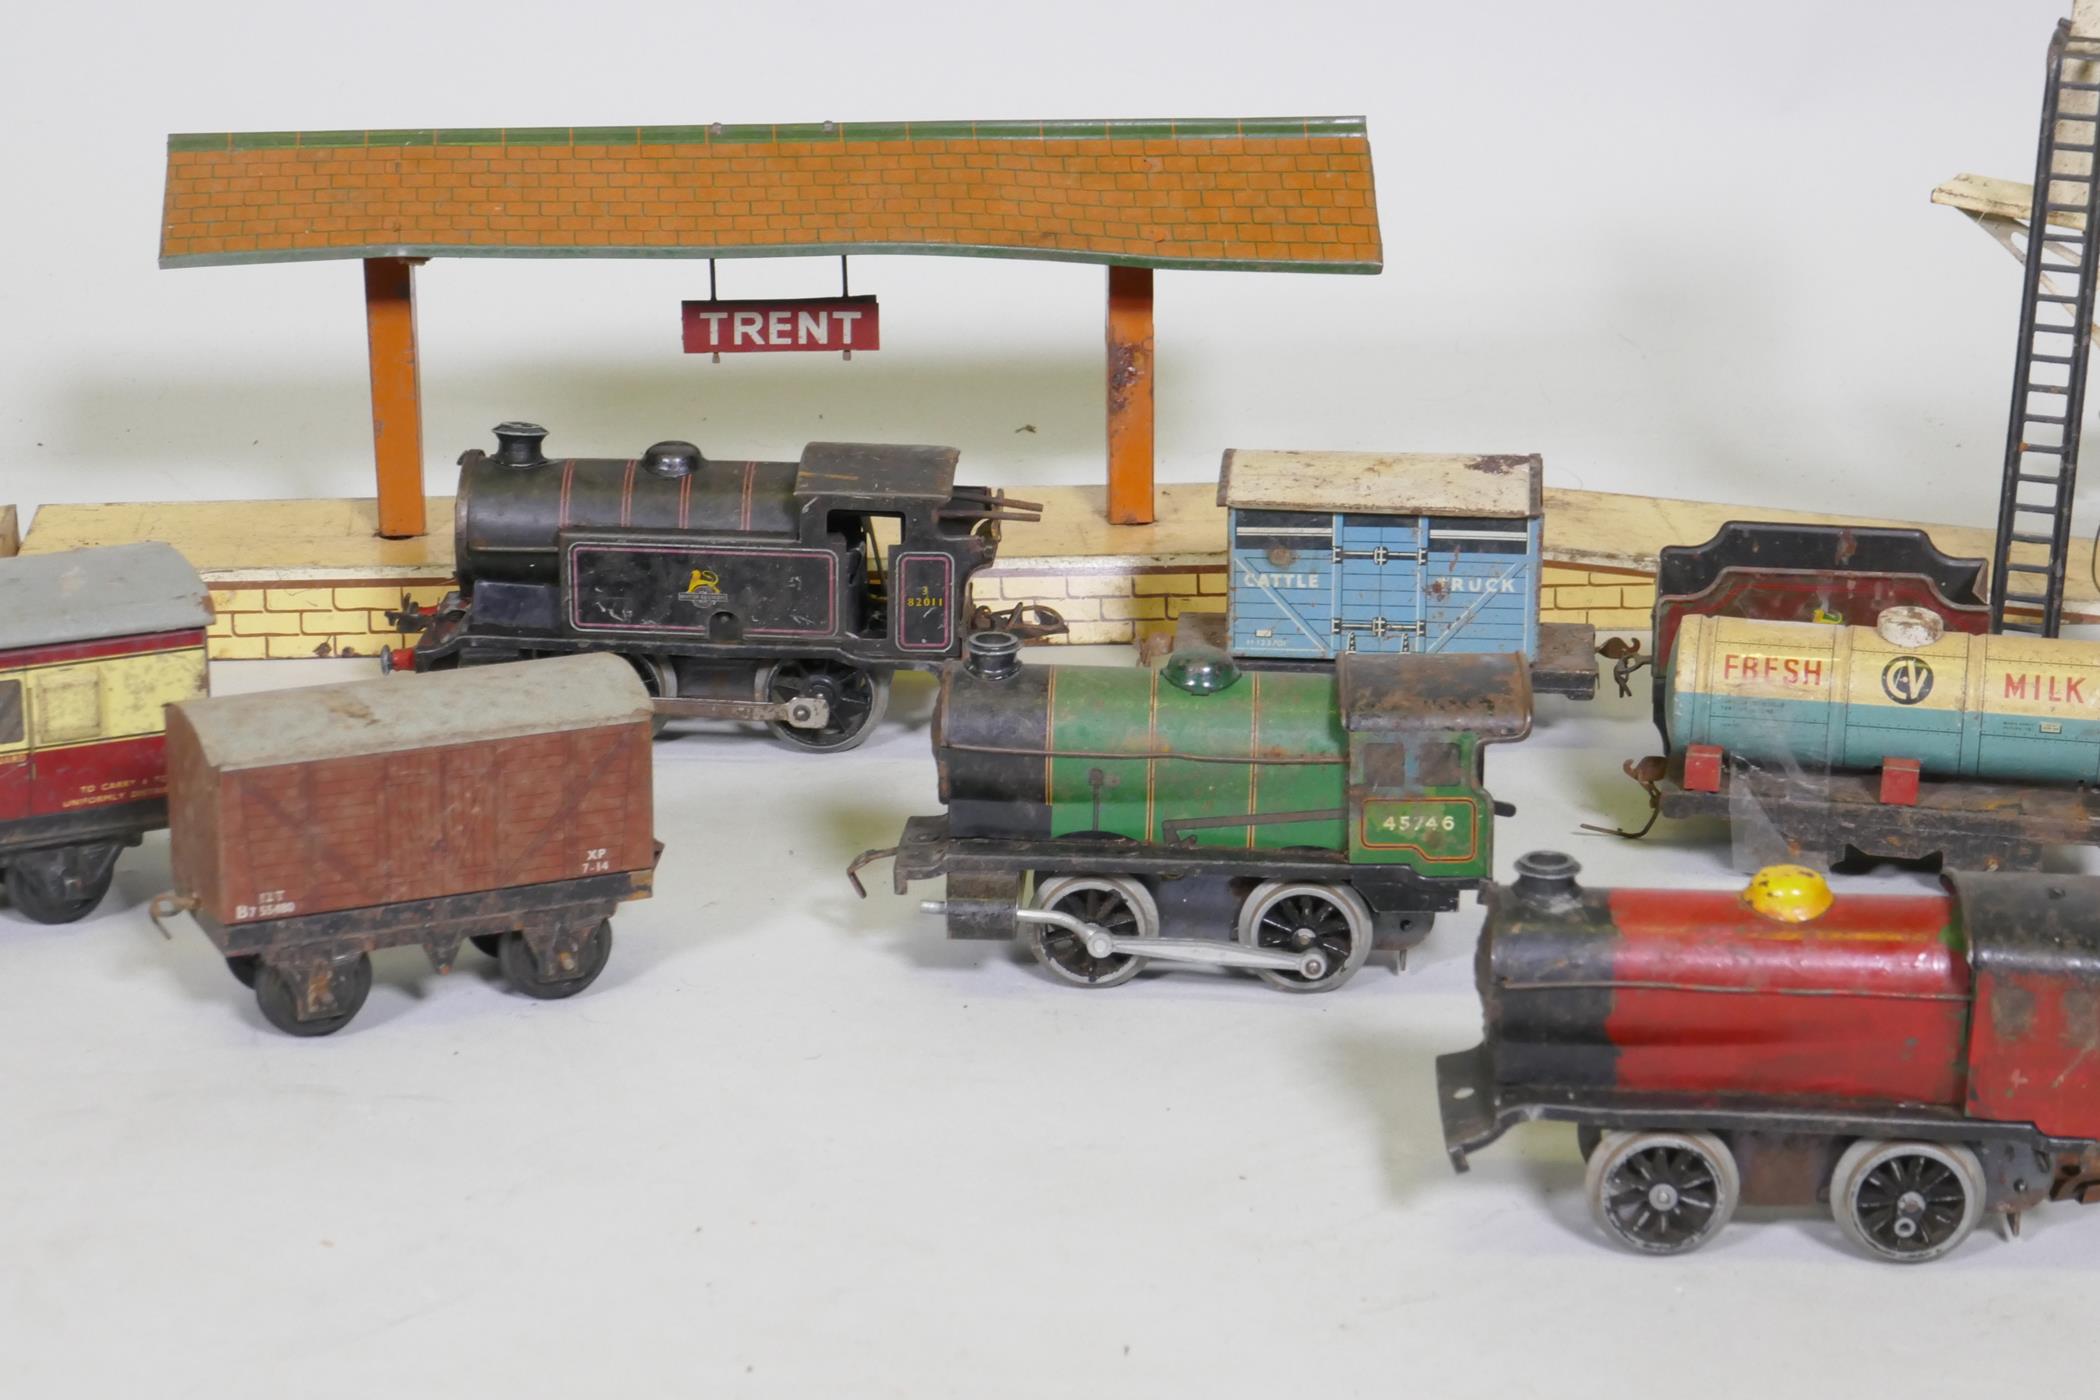 A vintage Hornby, Meccano Ltd O Gauge clockwork railway set, with two type 30 and one type 40